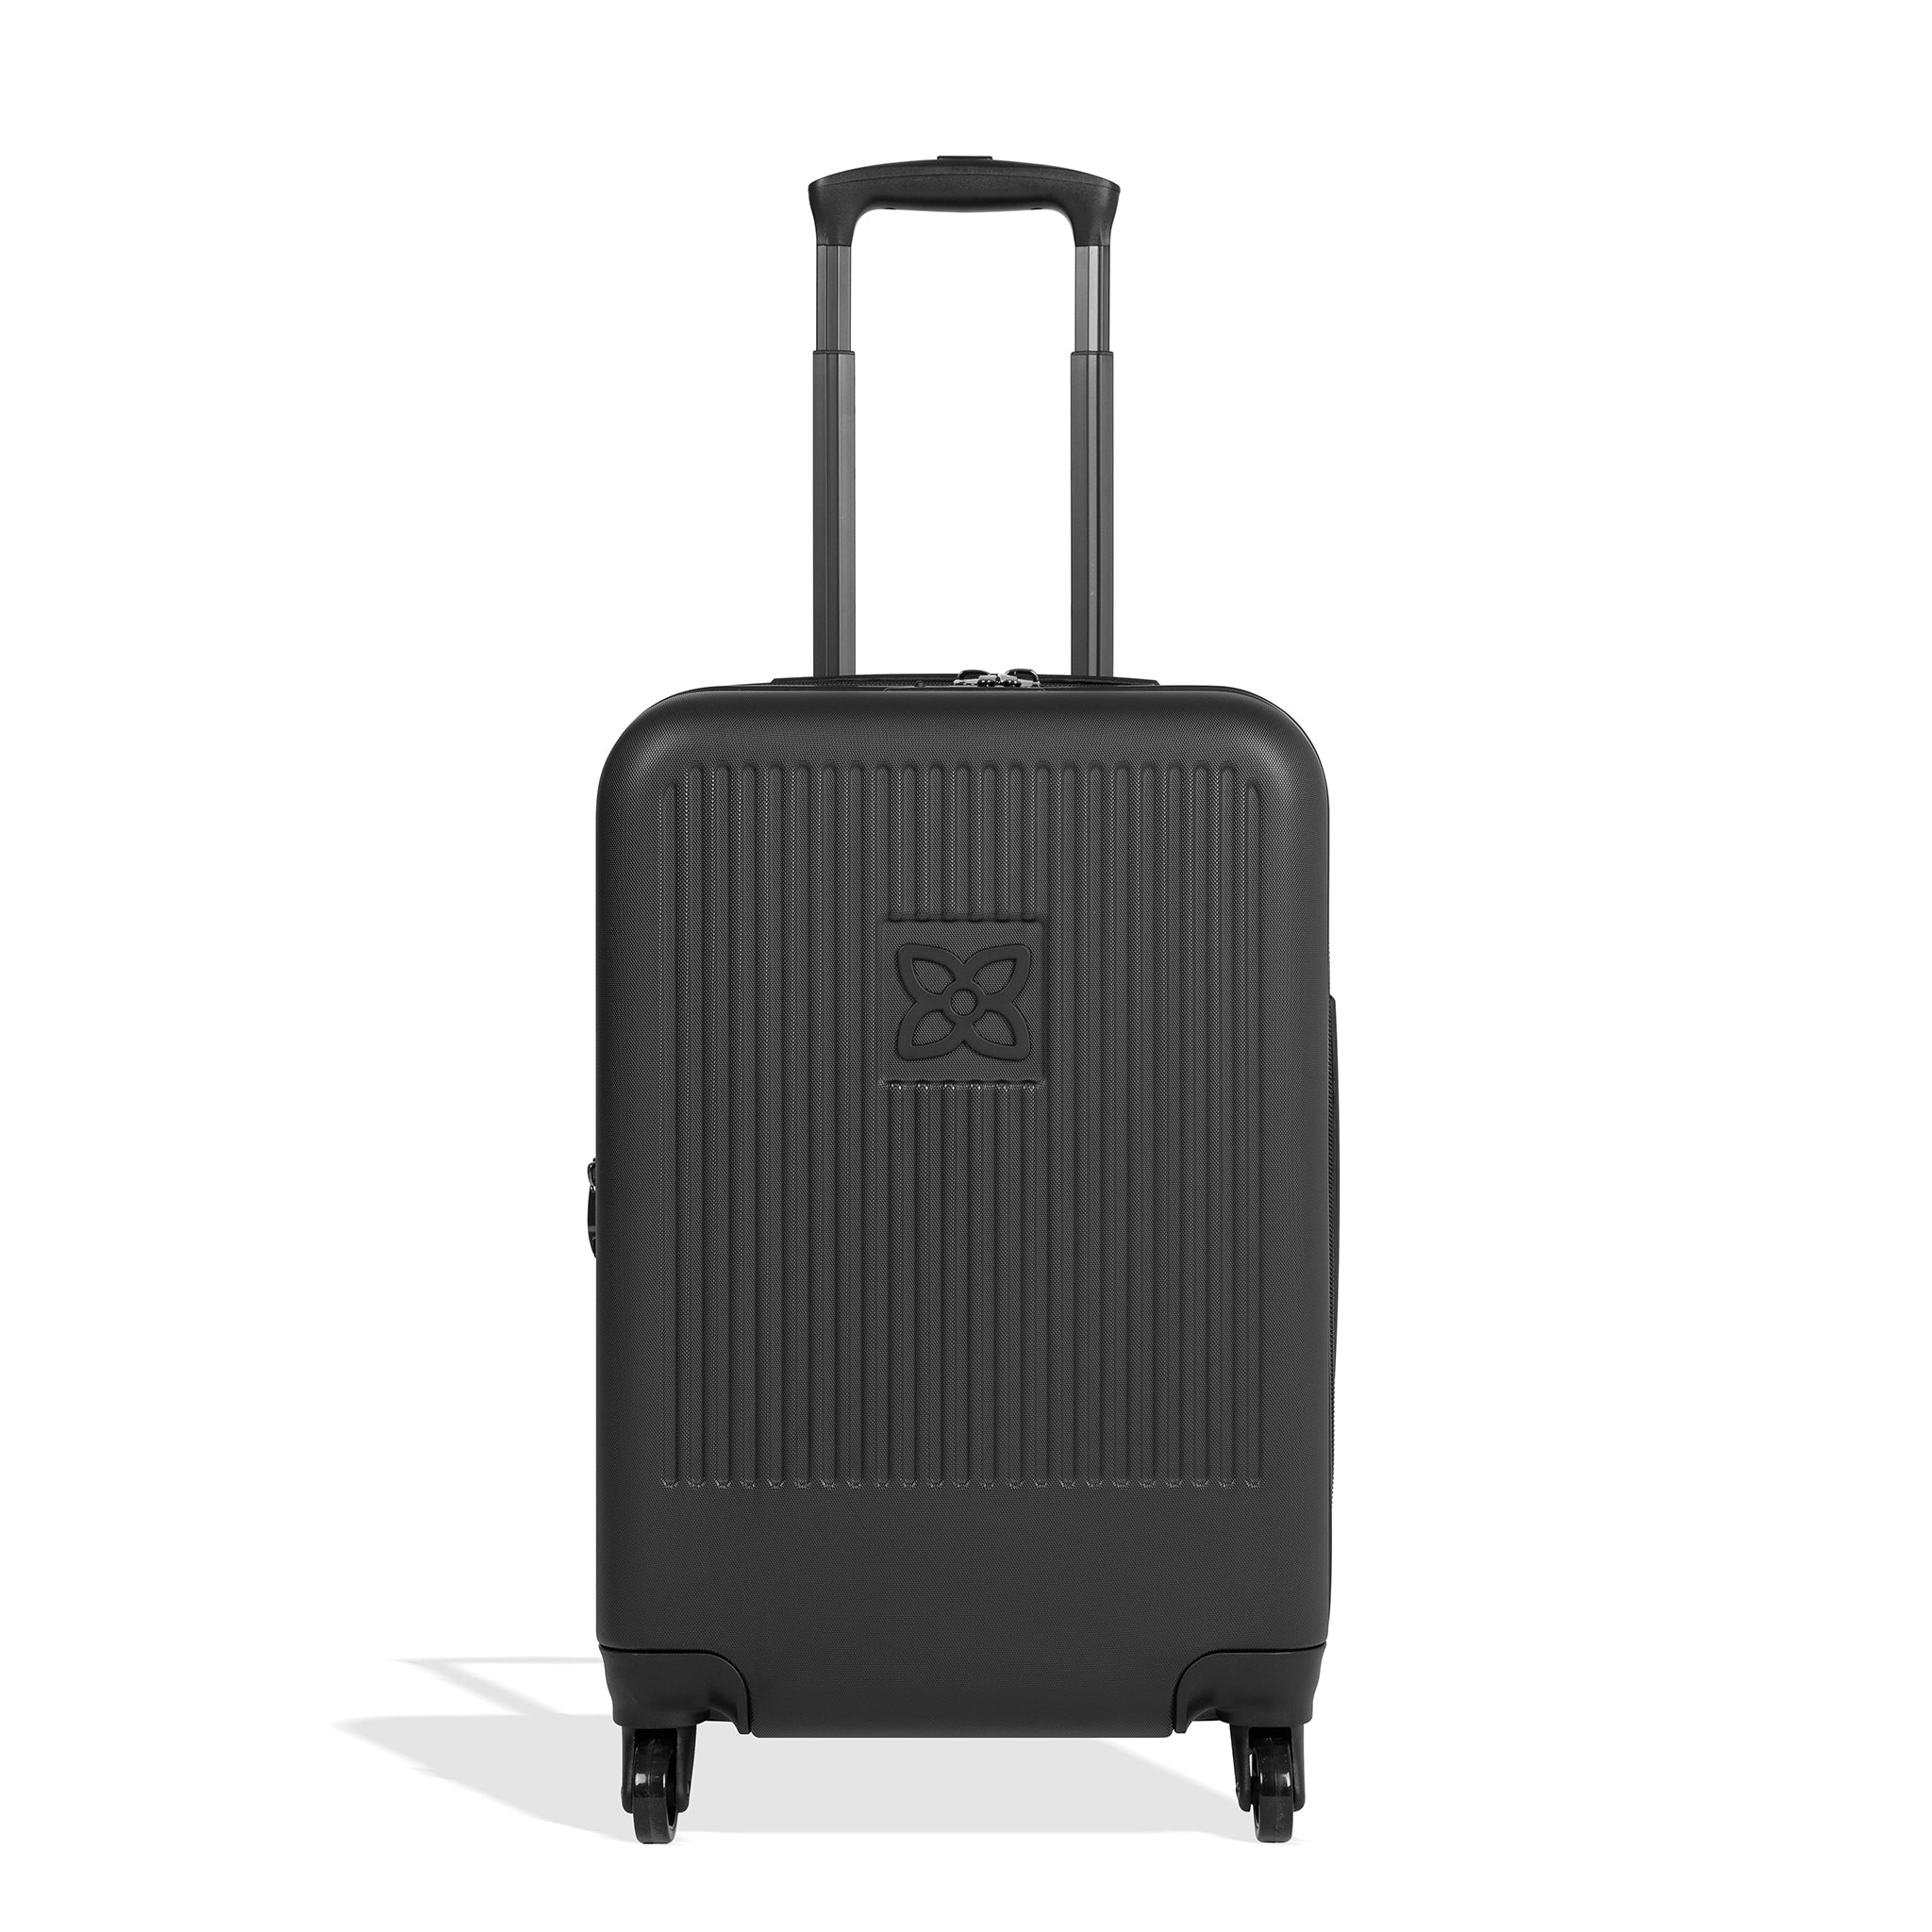 Flat front view of Sherpani hard-shell carry-on luggage, the Meridian in Black. Meridian features include a retractable luggage handle, uncrushable exterior, TSA-approved locking zippers and four 36-degree spinner wheels. 